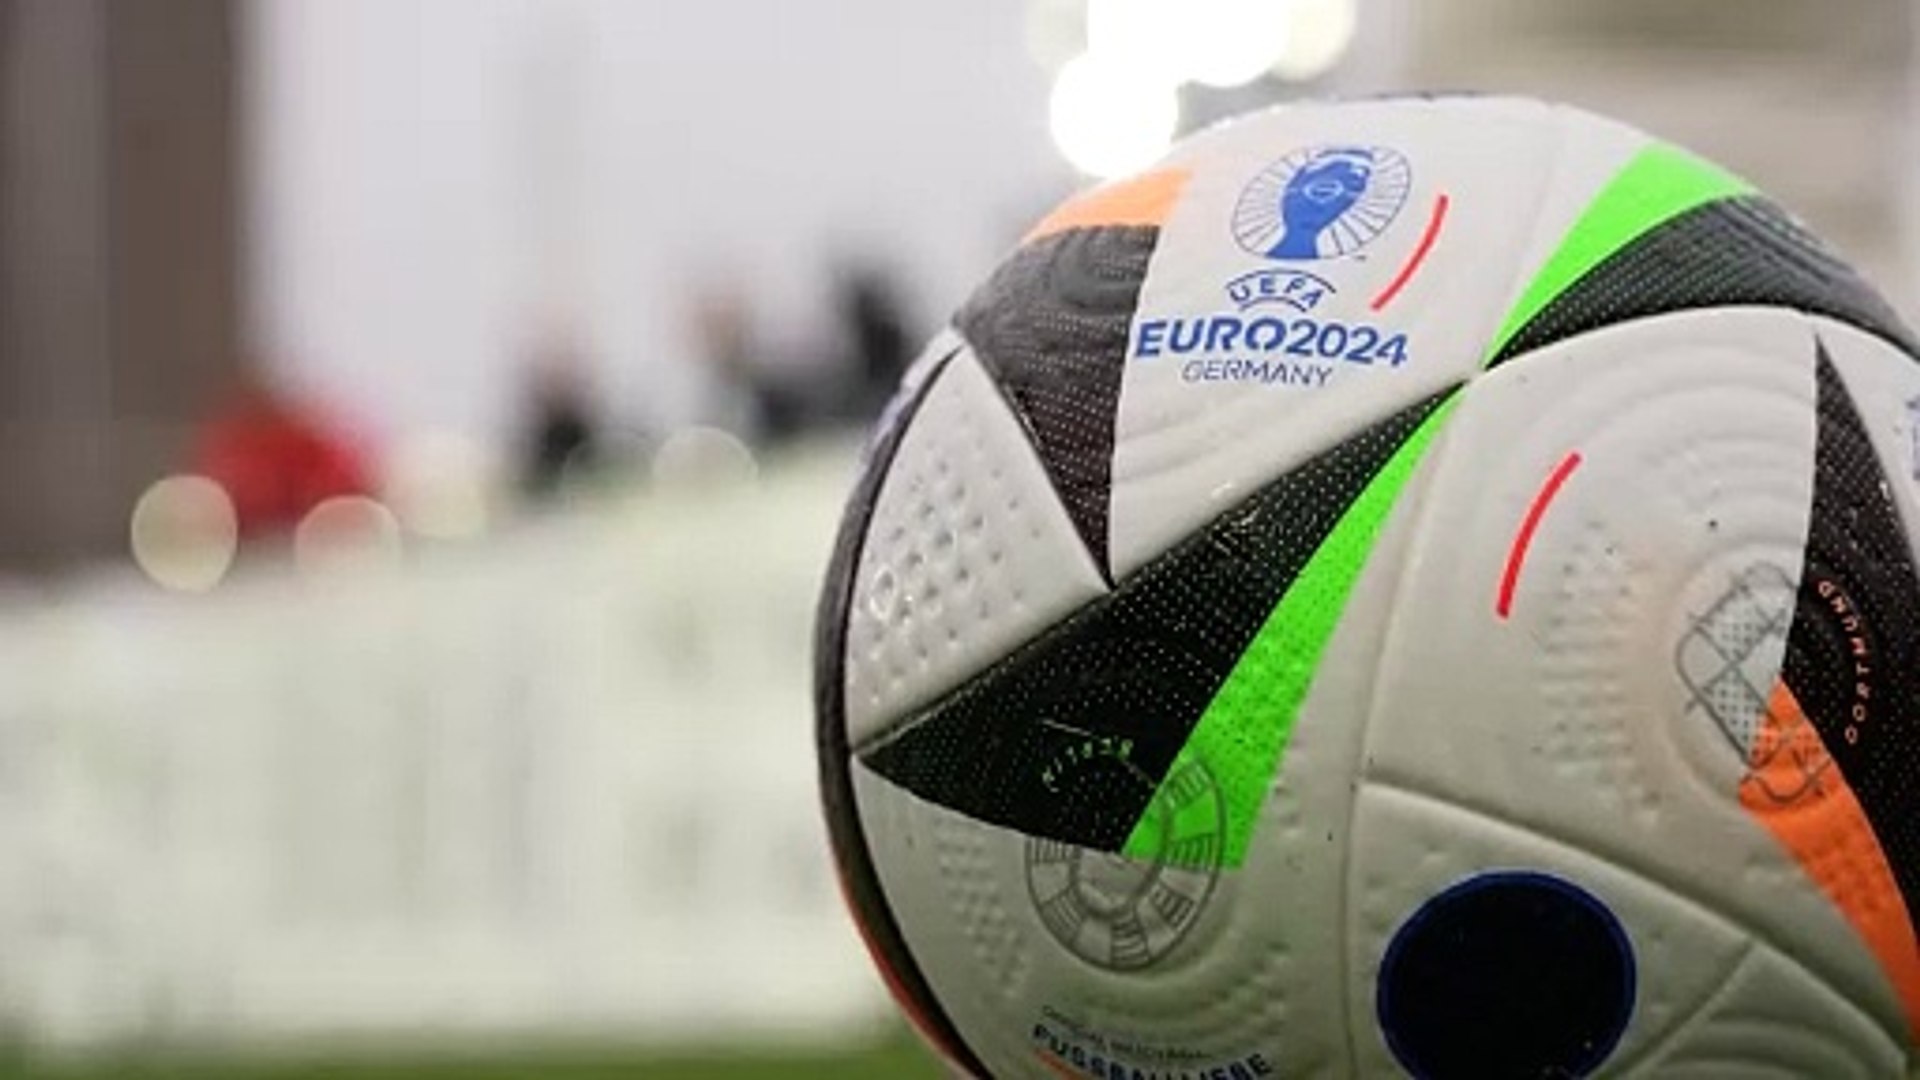 Adidas' Euro 2024 'helps strikers and goalkeepers' - video Dailymotion